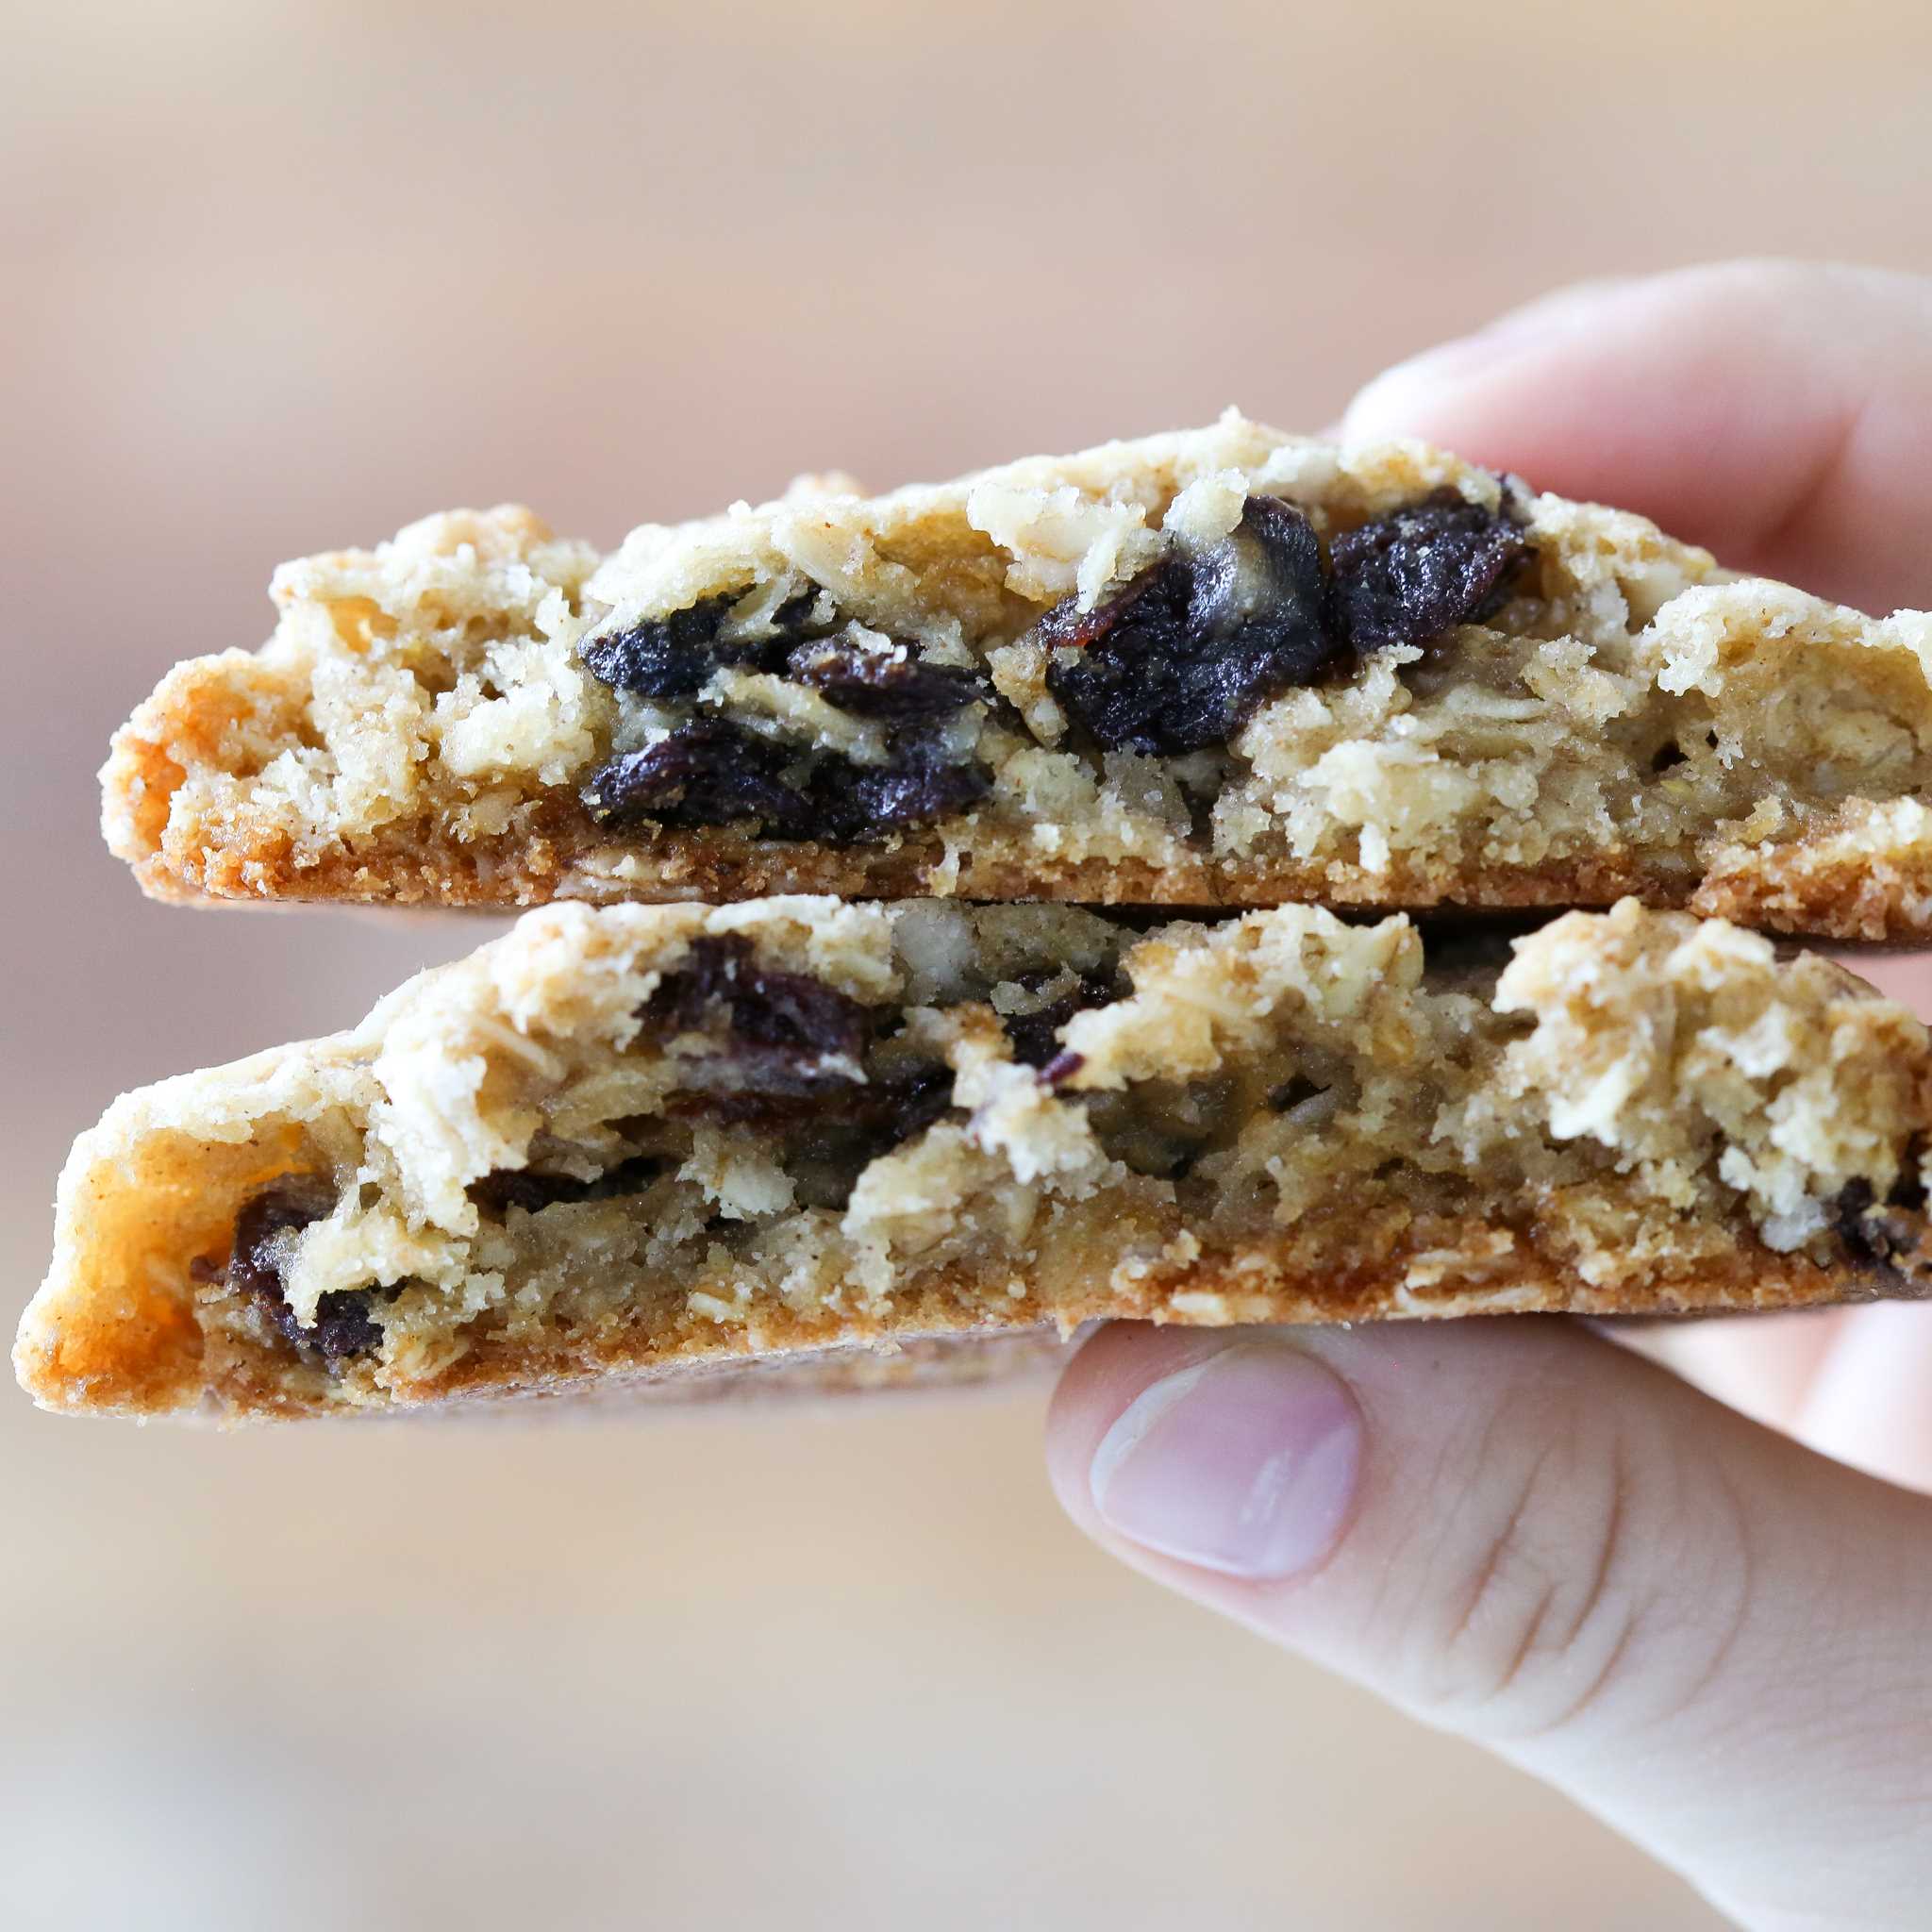 Two oatmeal raisin cookies held in a hand and packed with raisins.